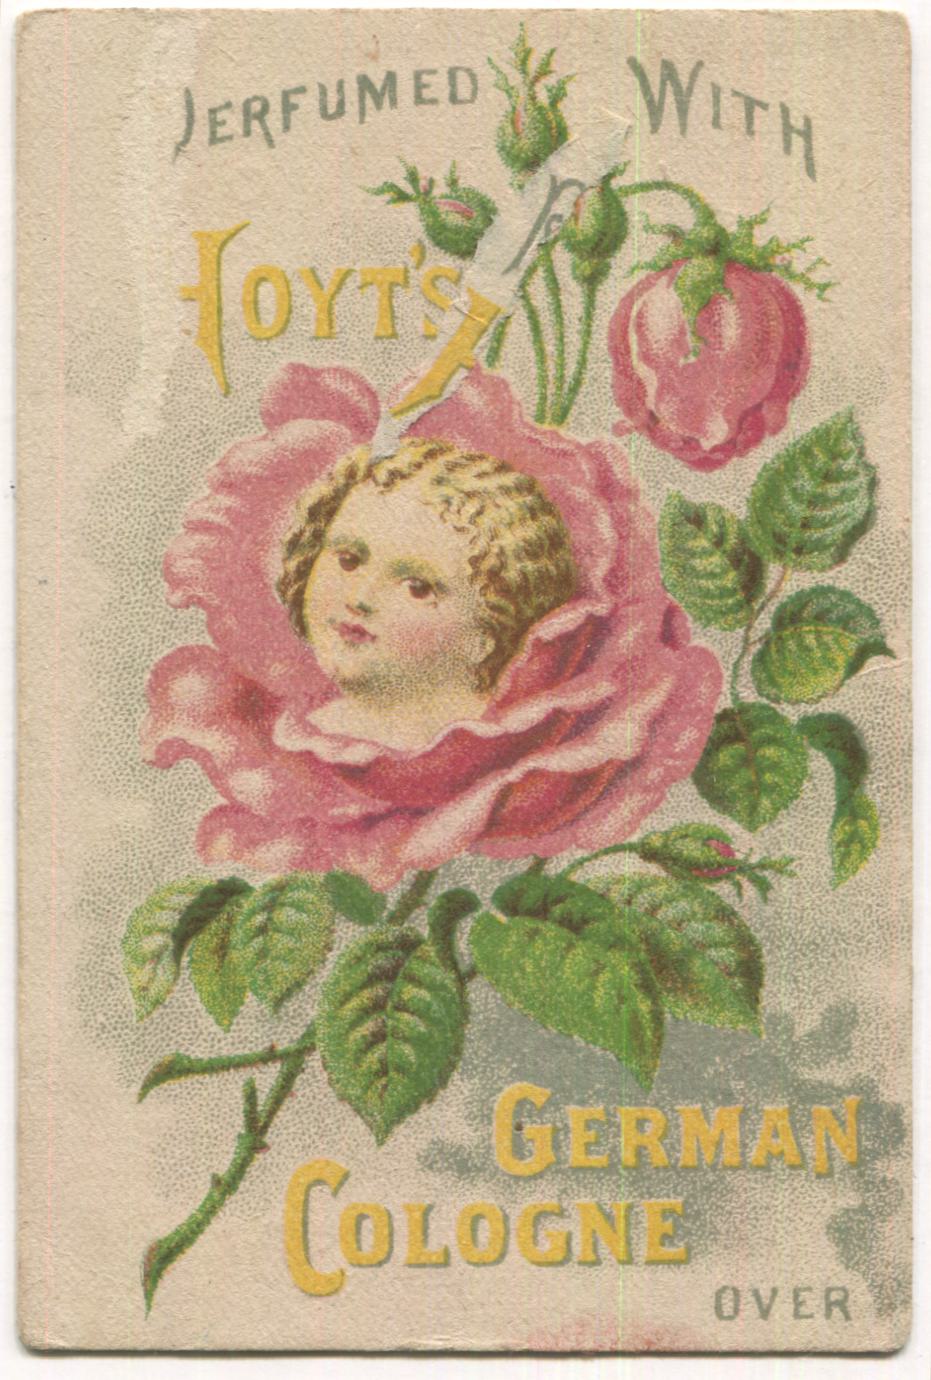 Hoyt's German Cologne, E.W. Hoyt & Co Lowell, MA Antique Lithographed Trade Card